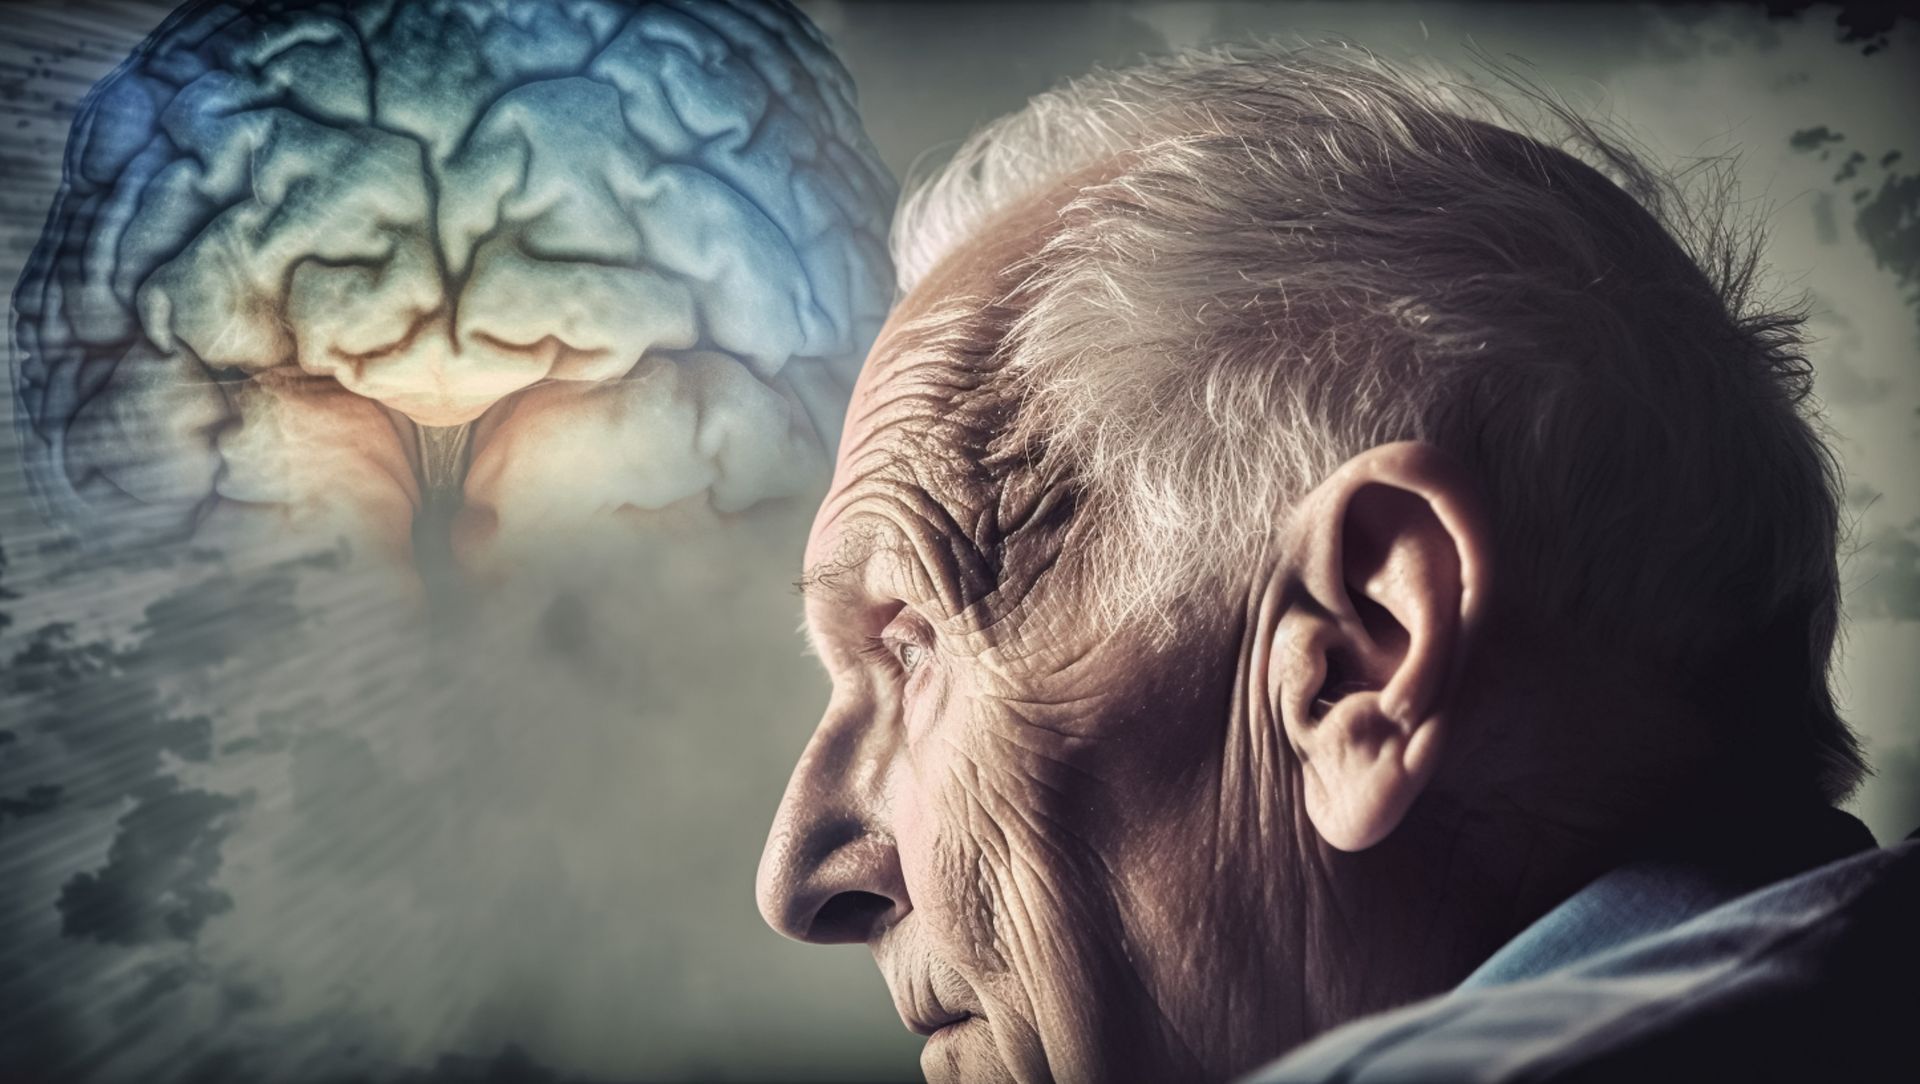 Alzheimers early detection with AI